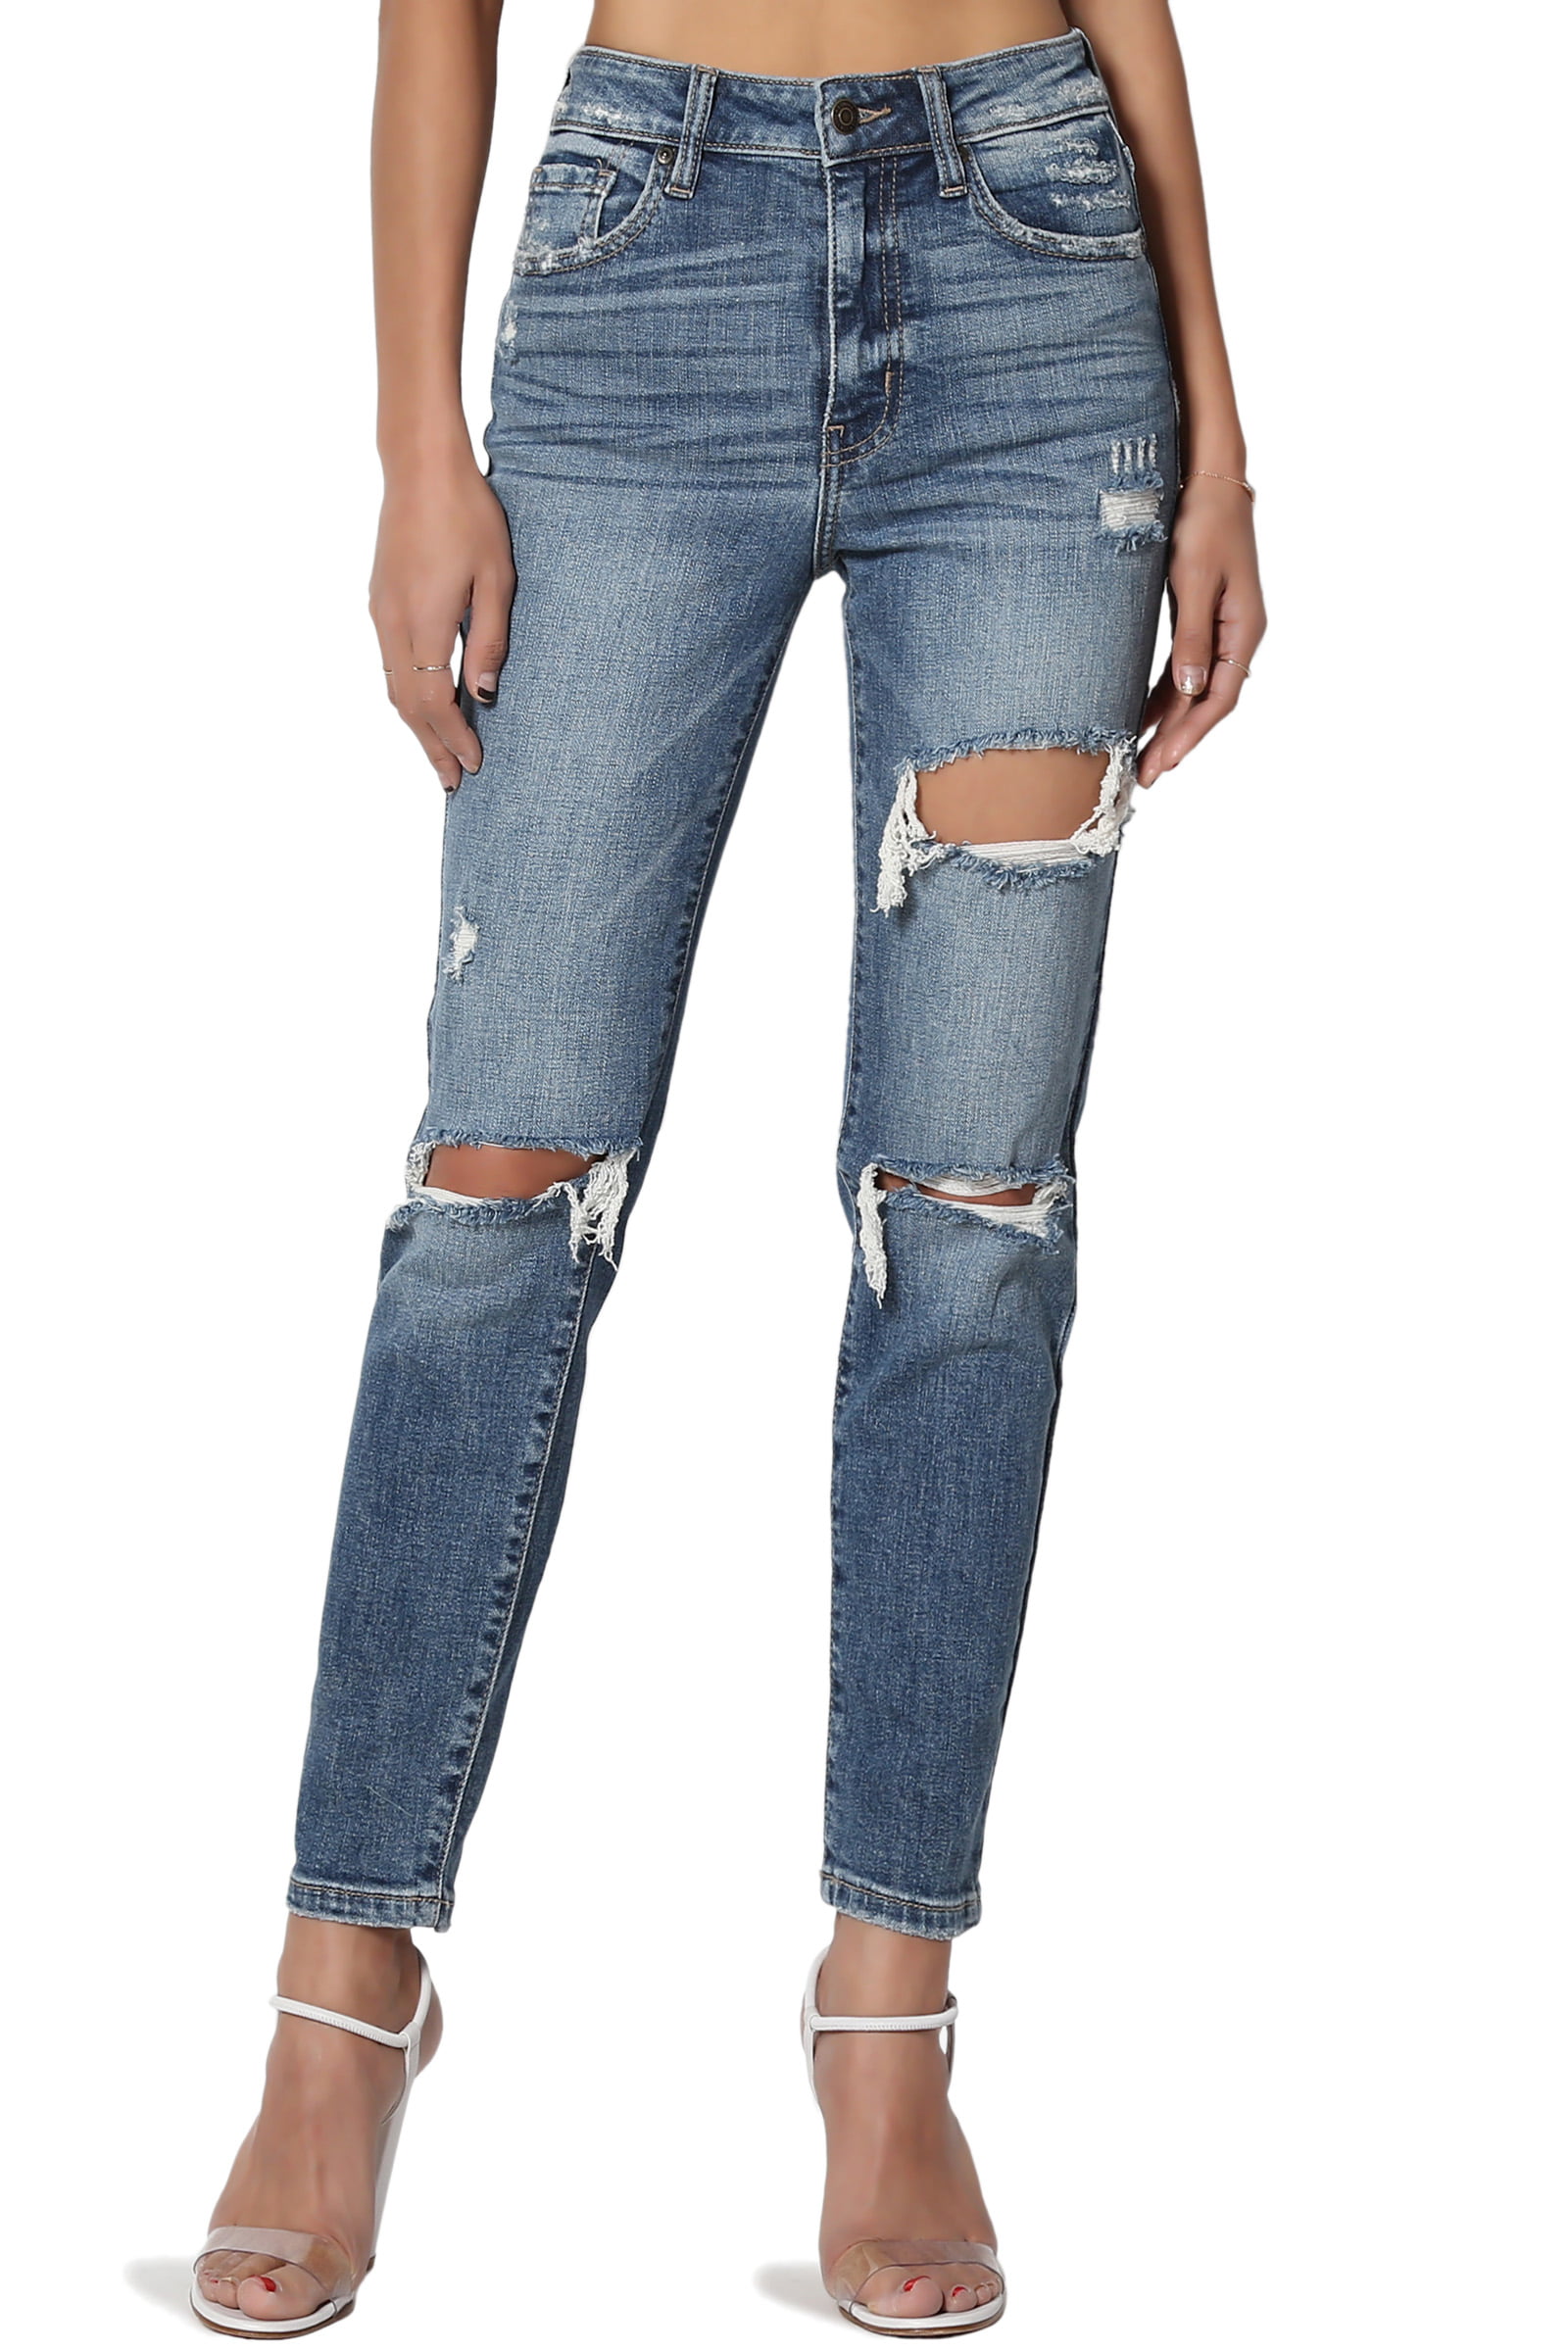 TheMogan - TheMogan Women's Ripped High Rise Distressed Relaxed Tapered ...